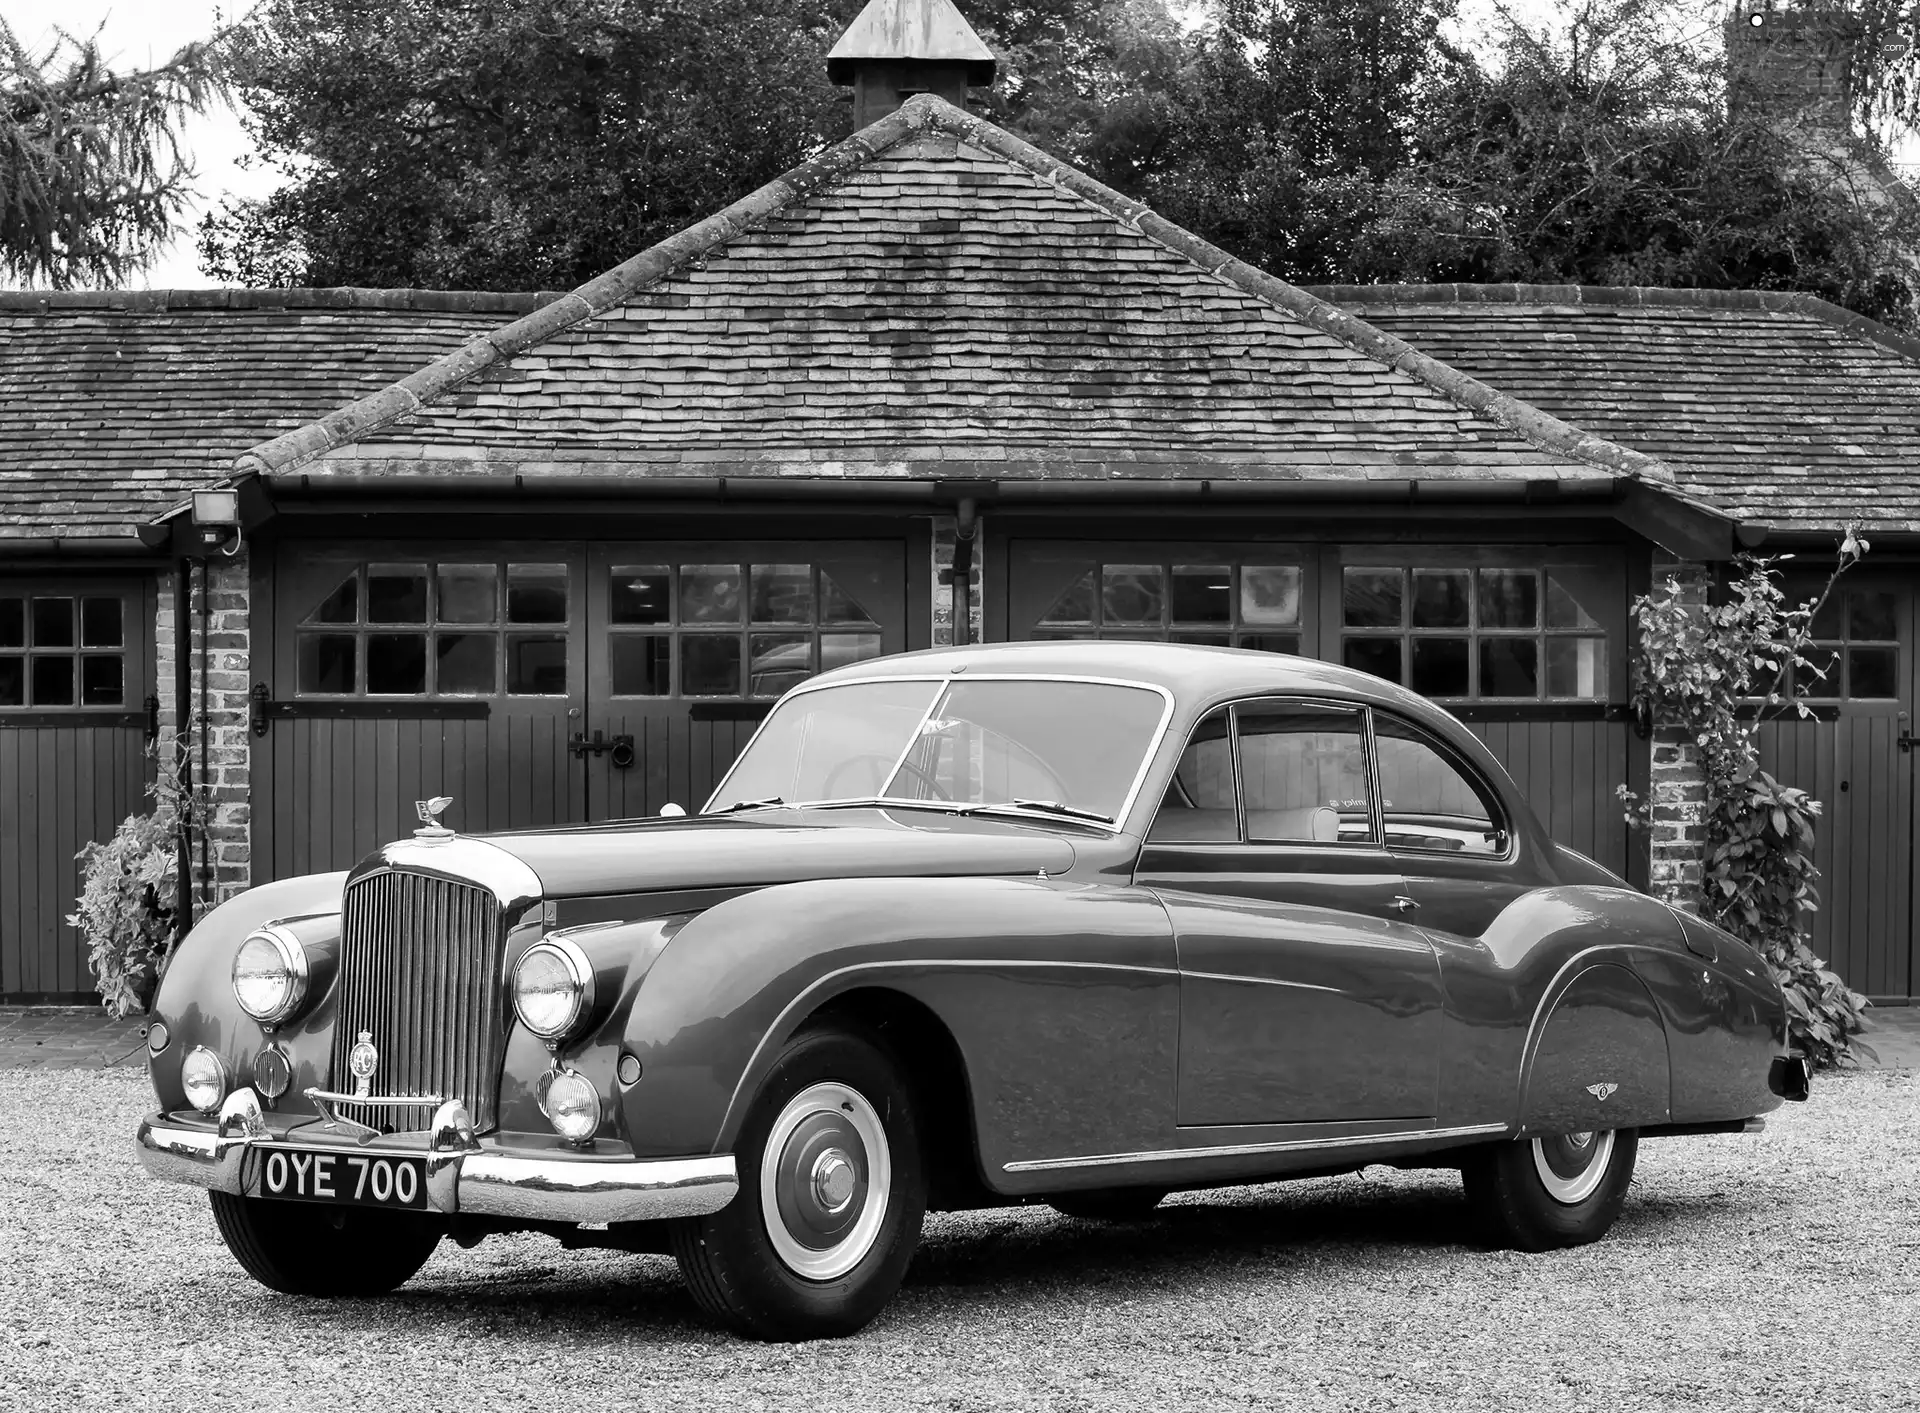 The historic car, Gray, Bentley R-Type Coupe